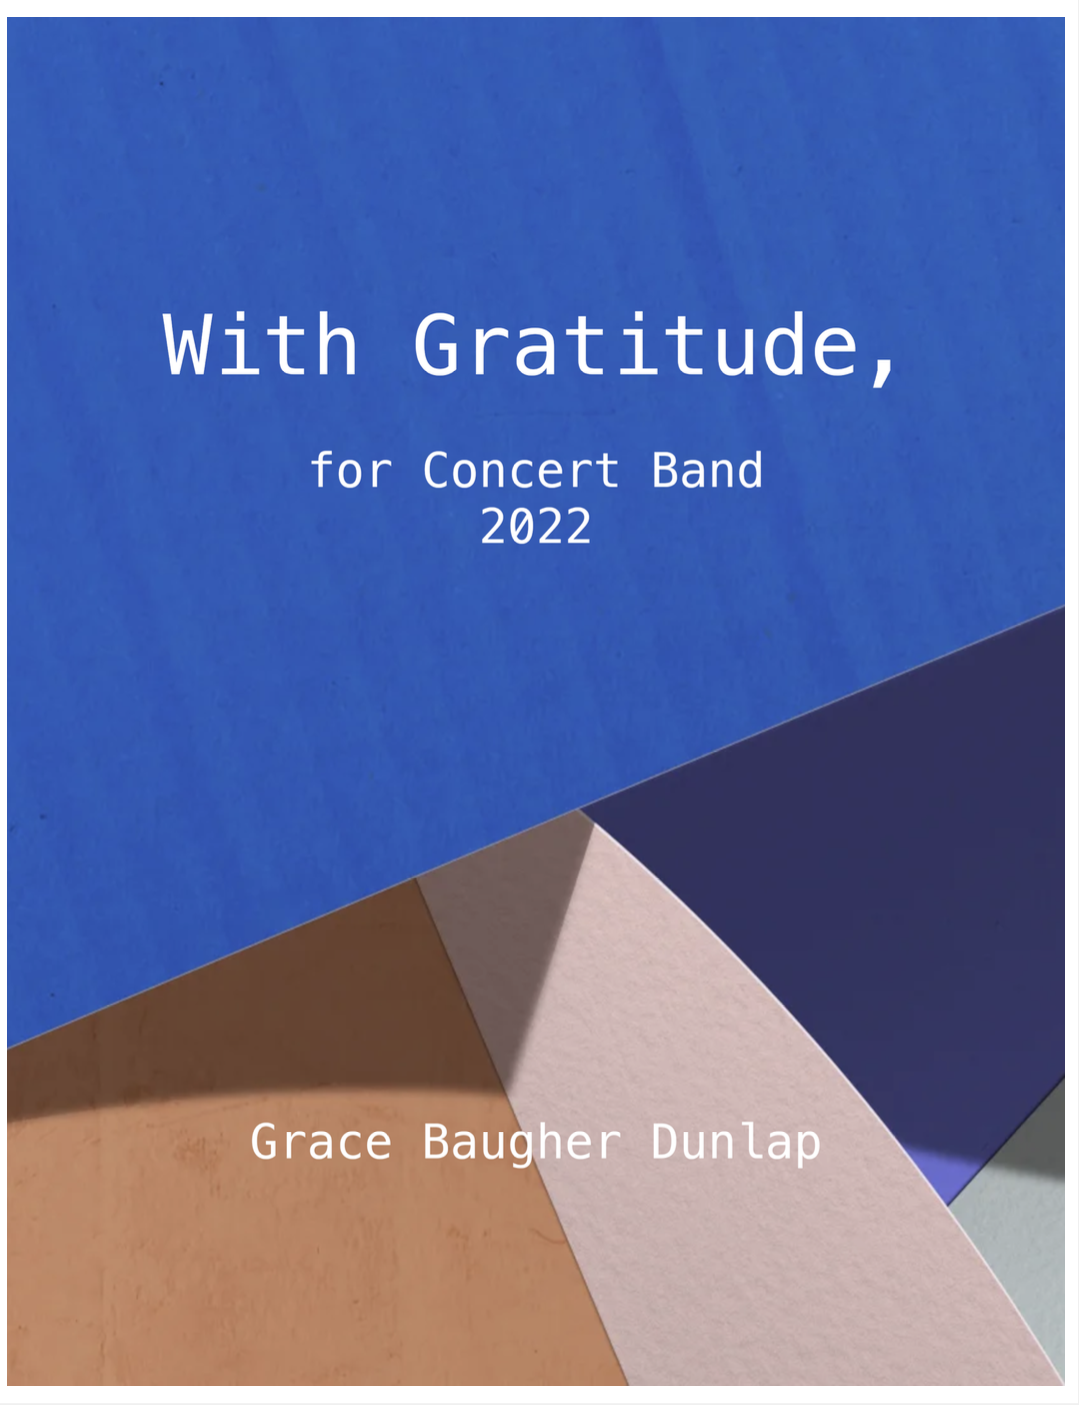 With Gratitude, by Grace Baugher